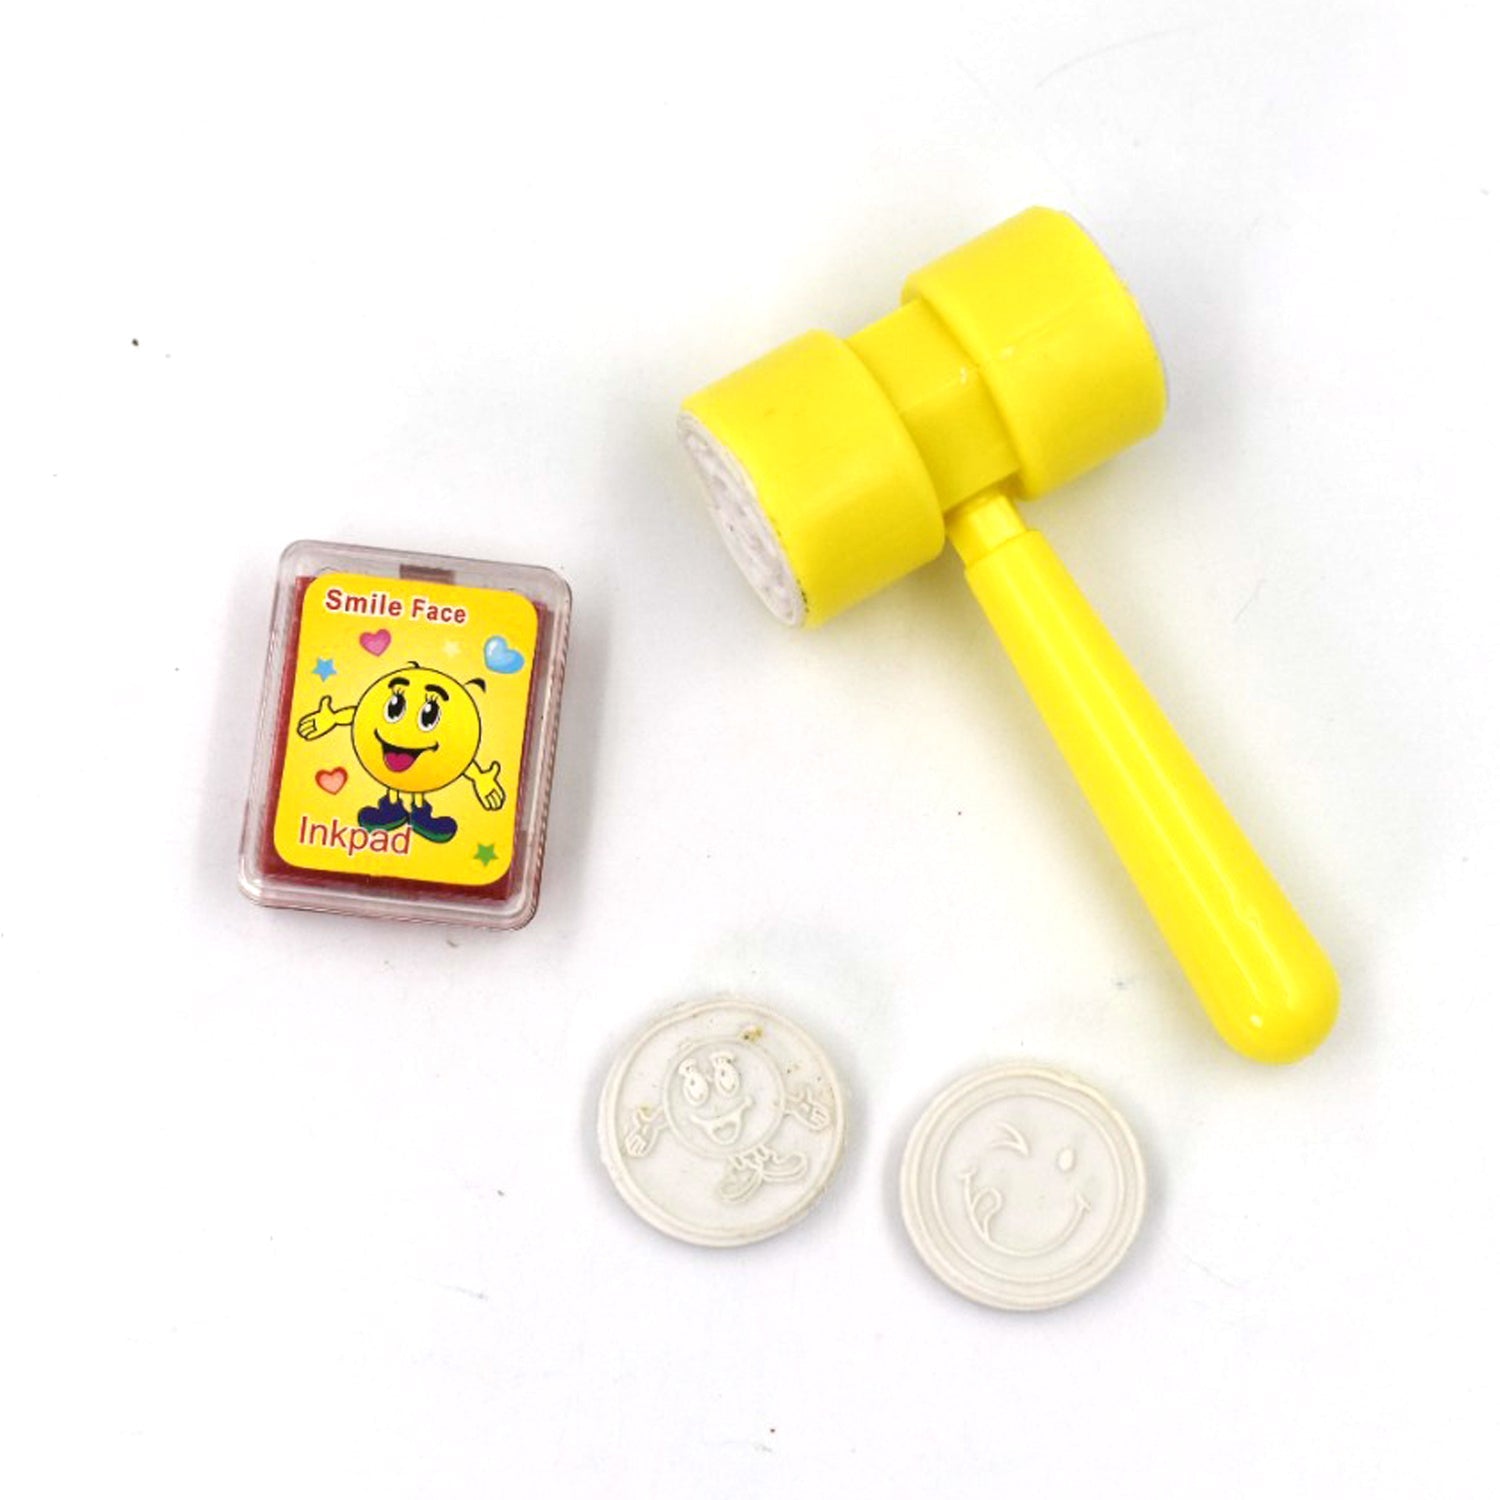 4810 Hammer Stamps 4 pieces - Smile Face 2 Hammer Seal Stamps with Small Hammer for Kids Theme Stamps for School Craft & Prefect Gift for Teachers, Parents and Students (Multicolor) freeshipping - DeoDap